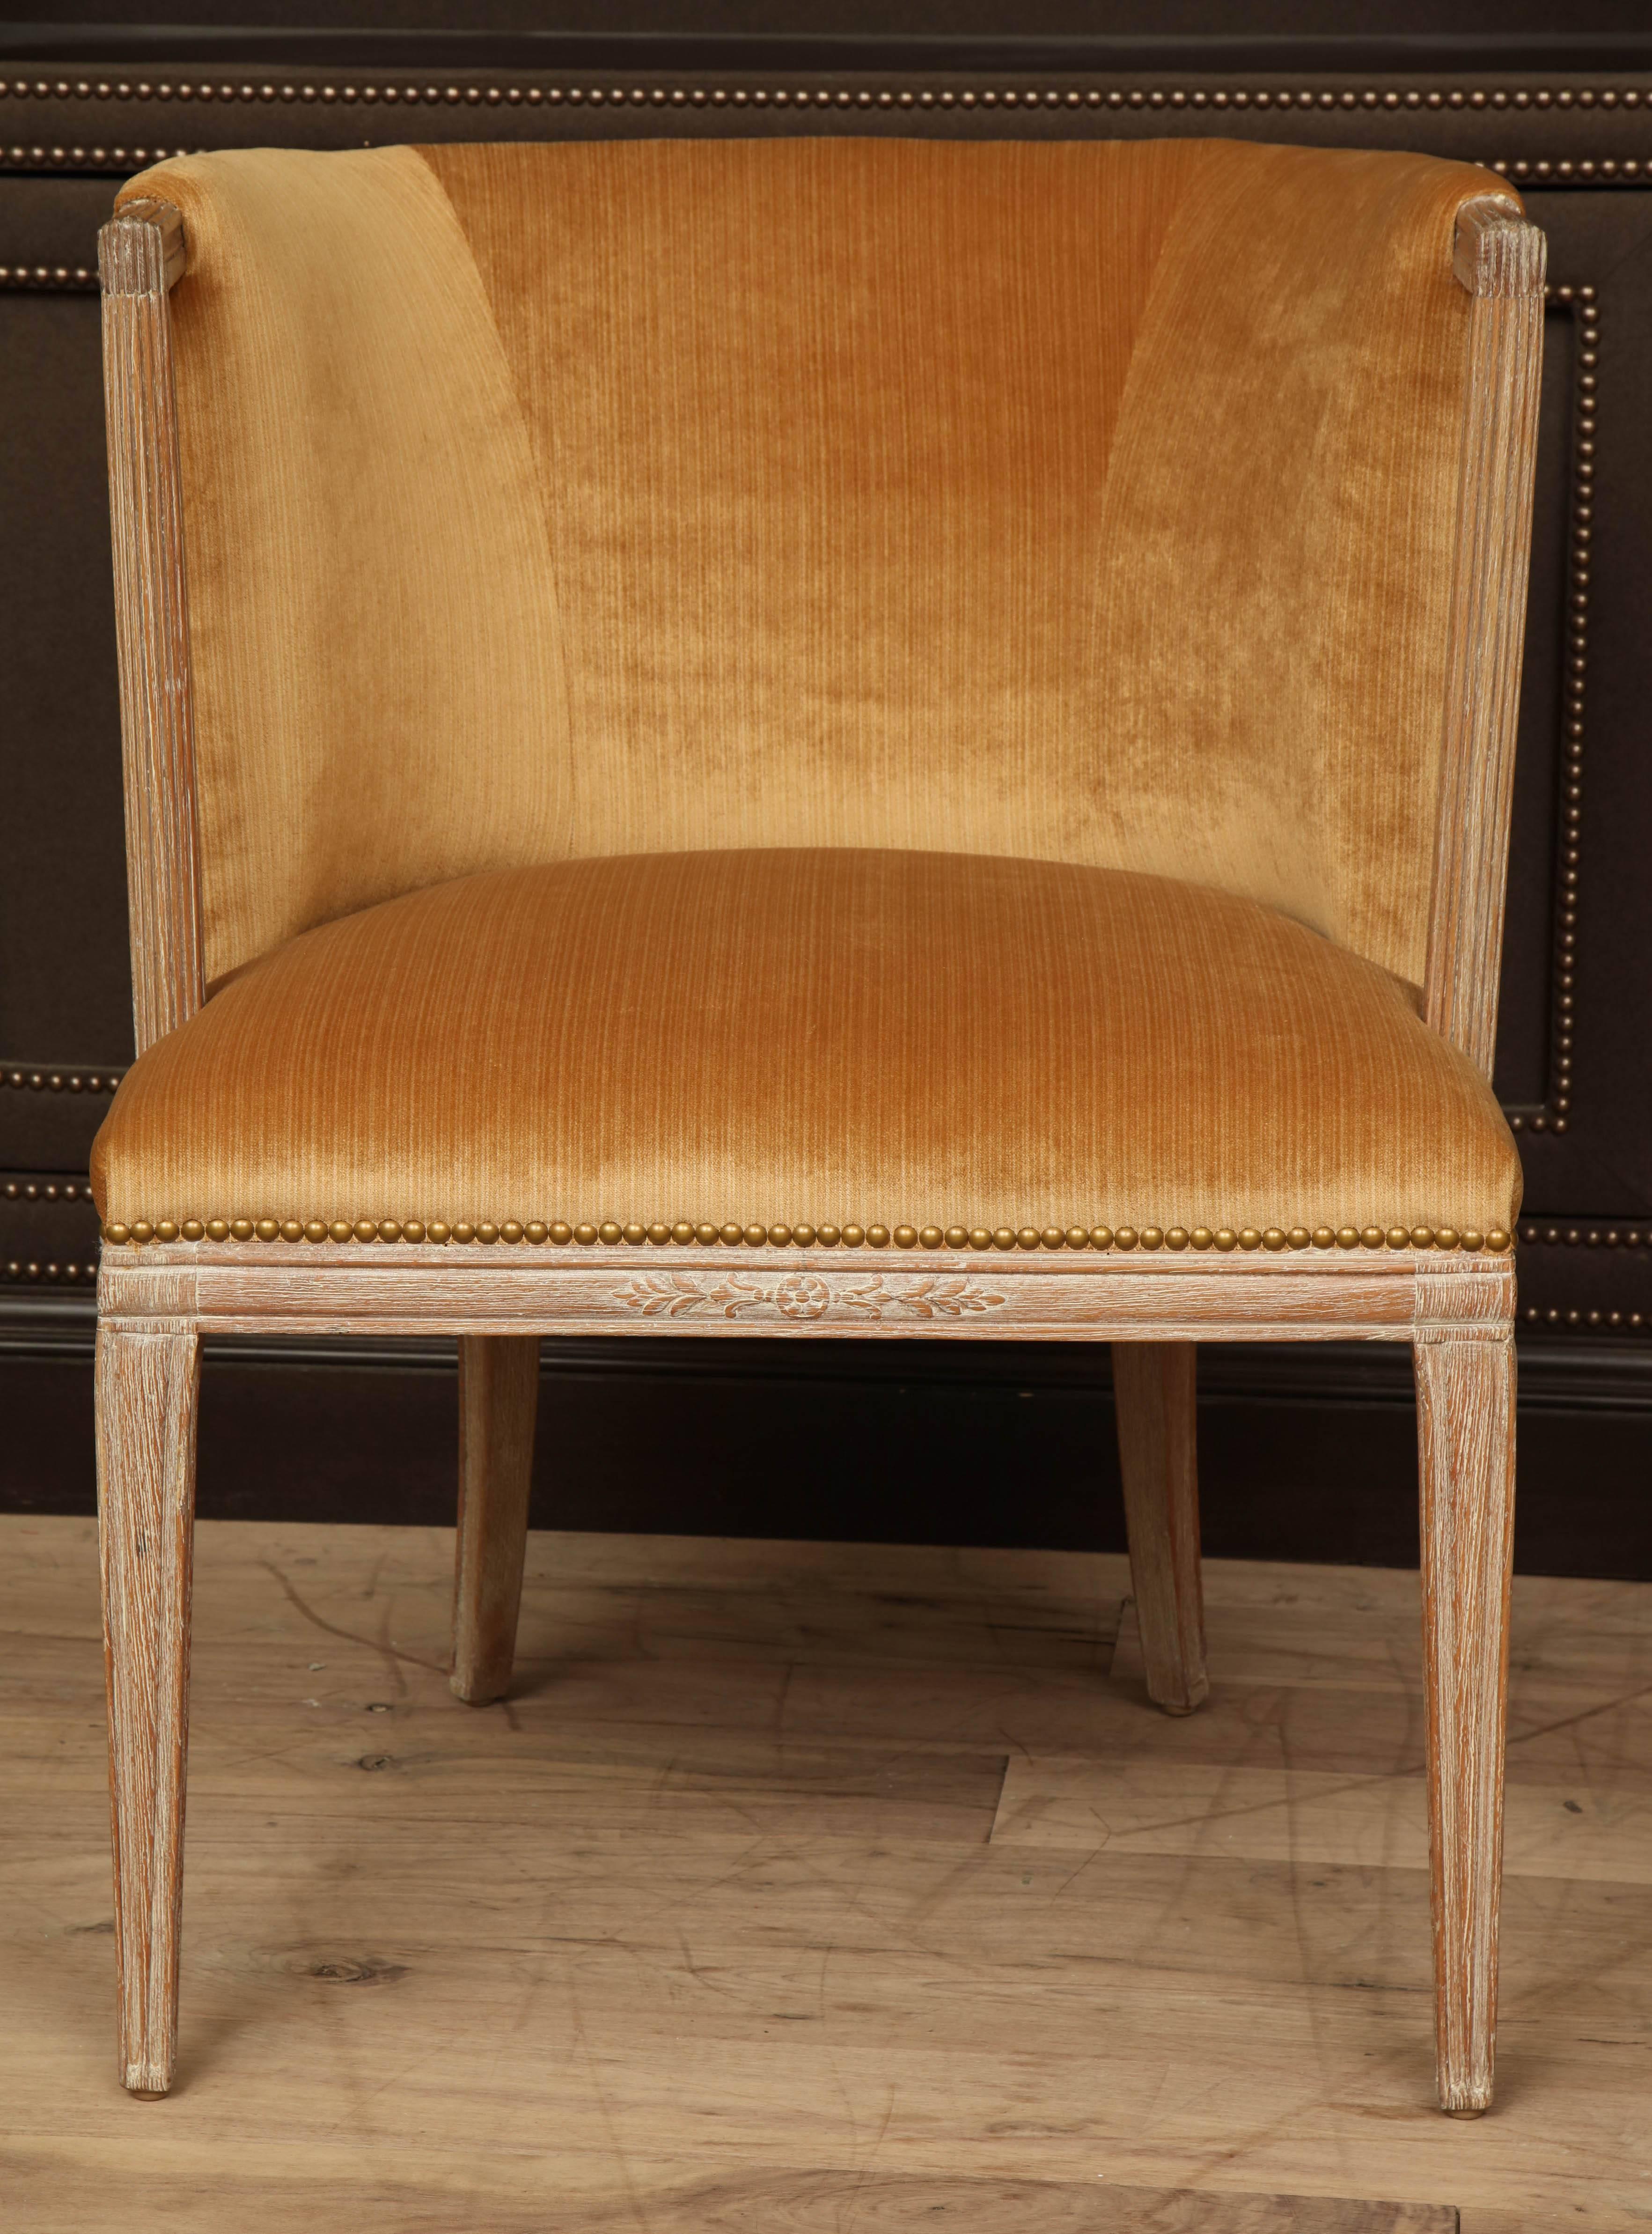 Brushed oak armchair by Grosfeld House, circa 1940 with reeded, open arms and recently reupholstered in apricot strie velvet.